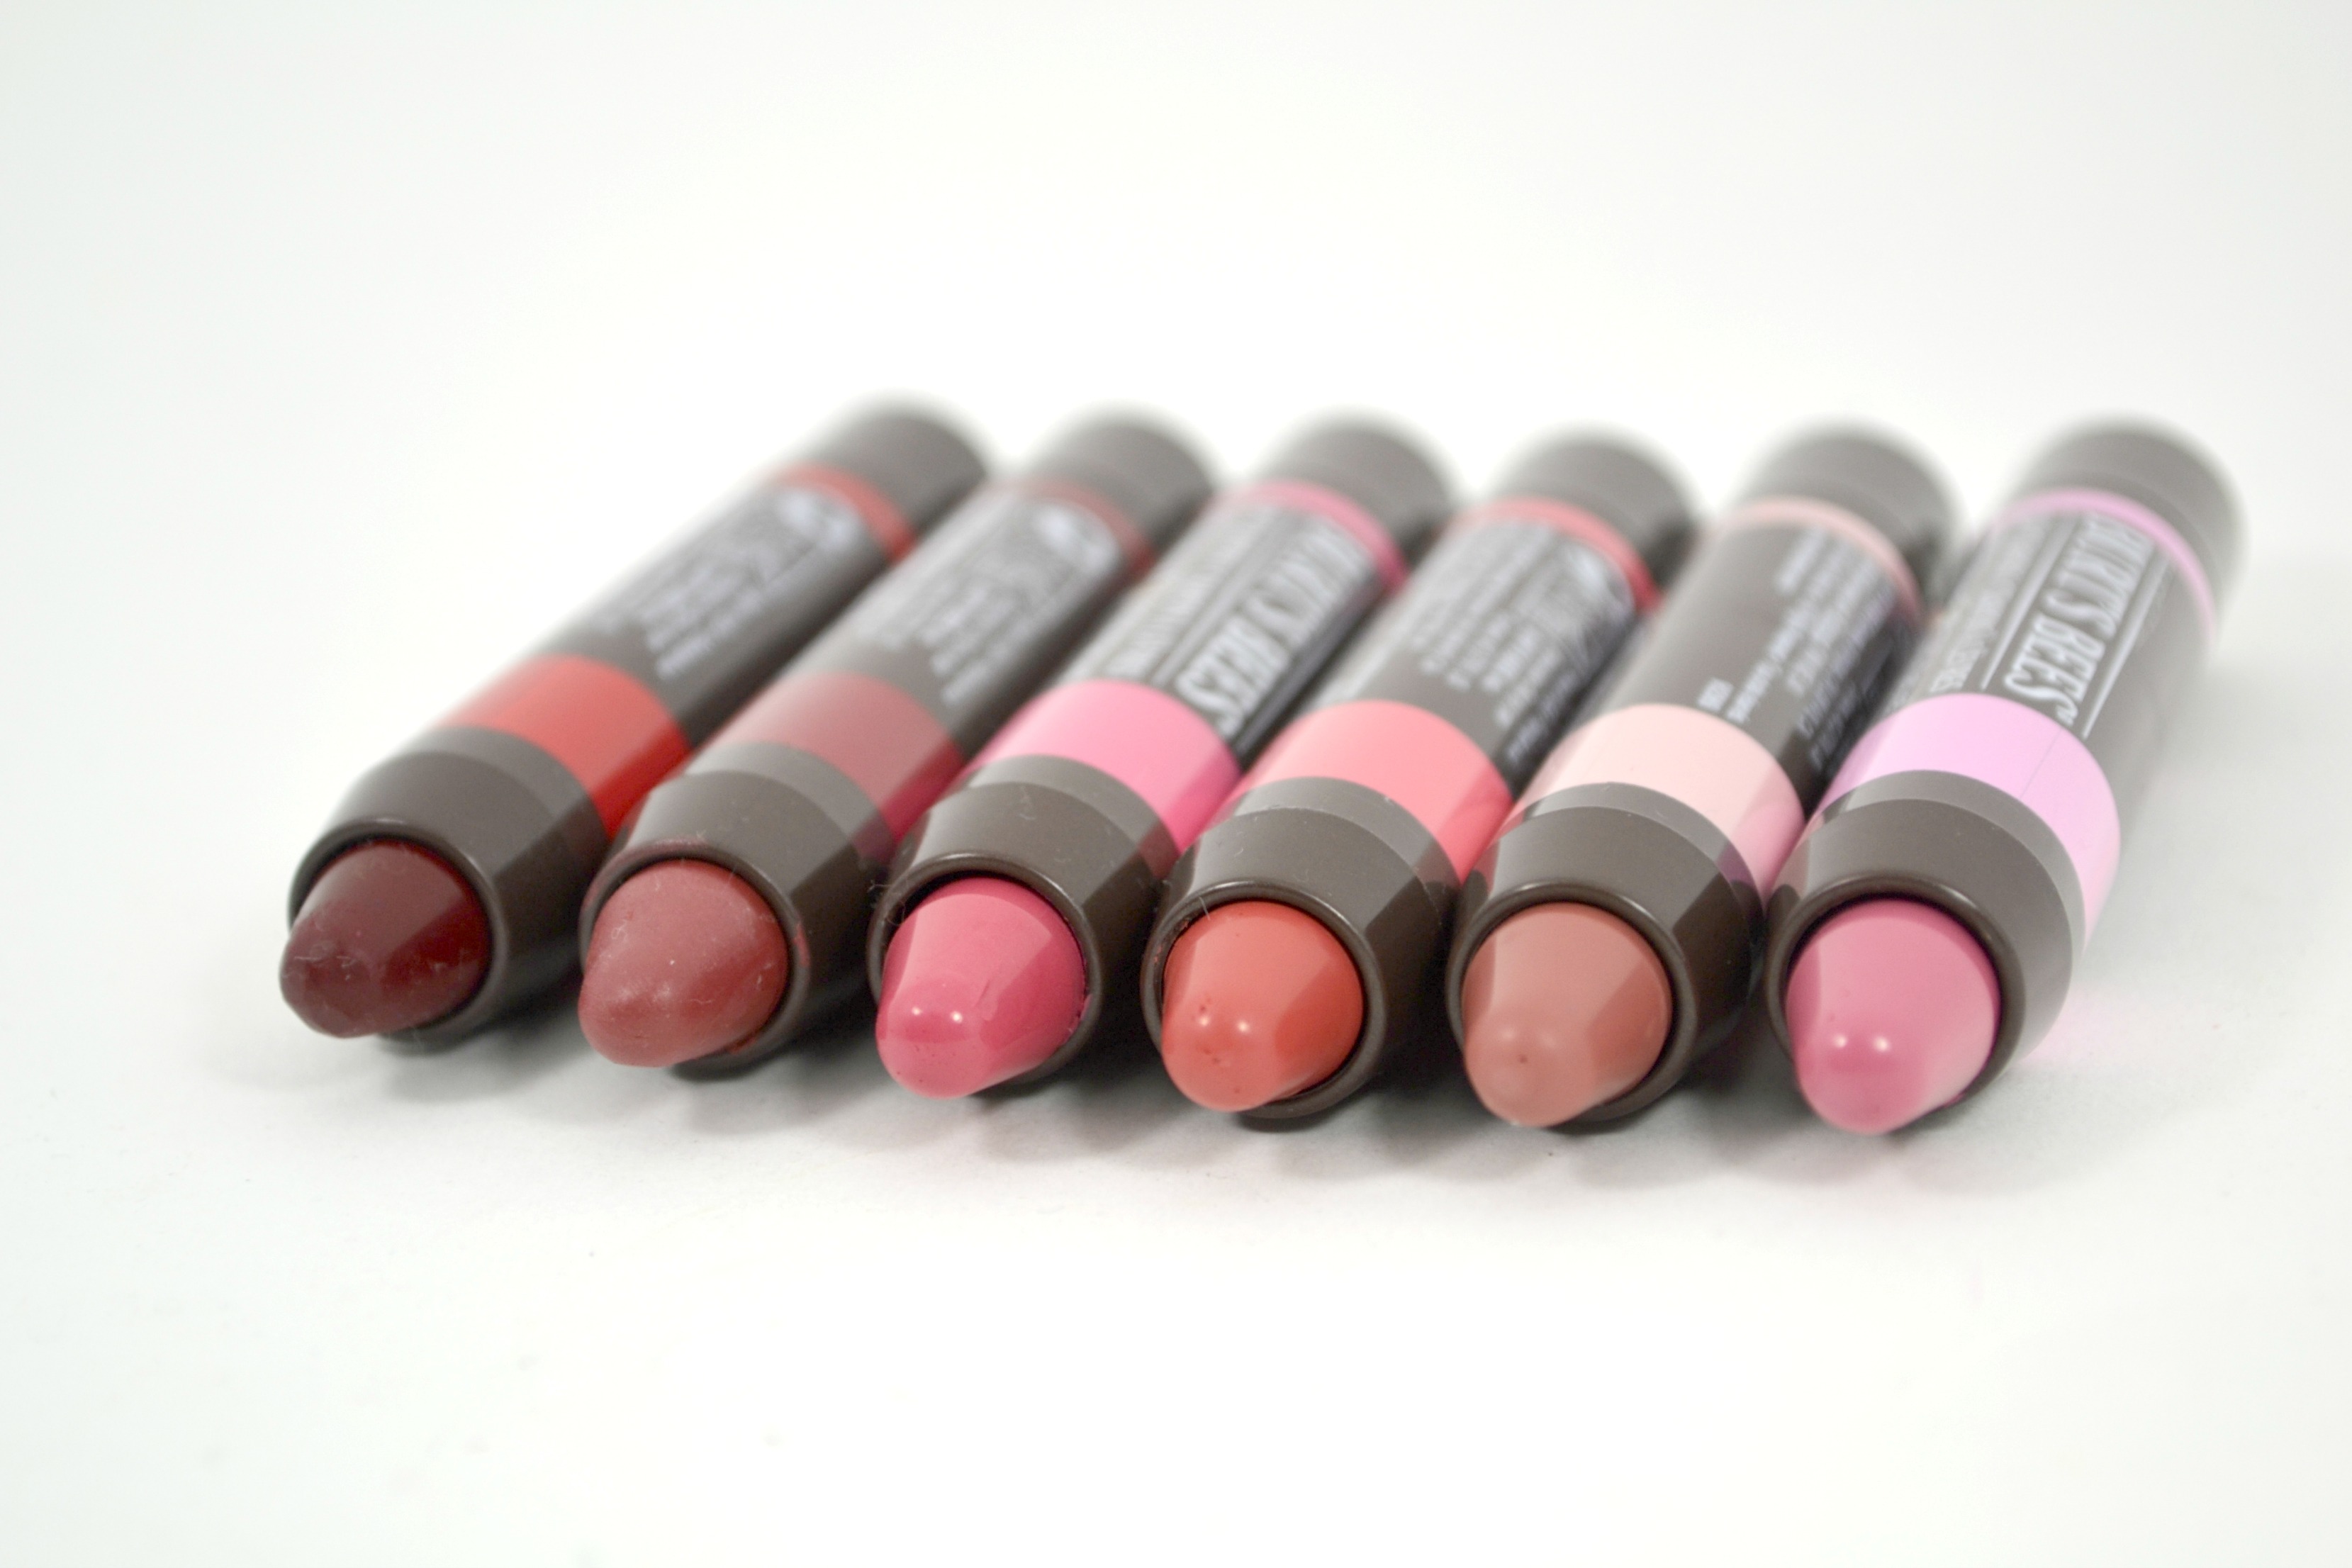 Burt’s Bees Lip Crayons Review and Swatches